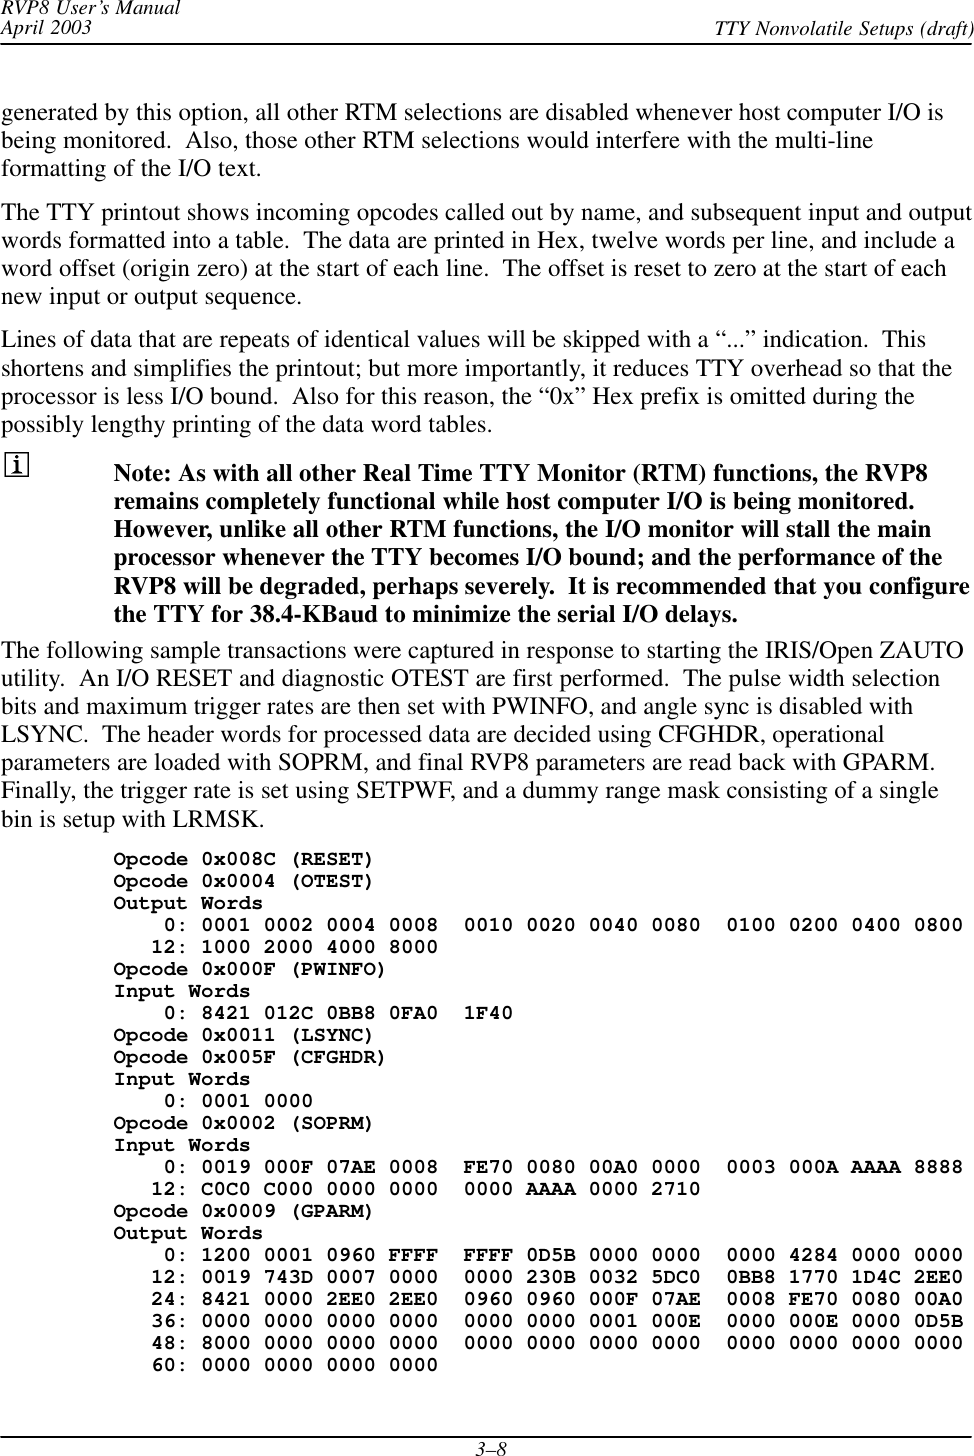 RVP8 User’s ManualApril 2003 TTY Nonvolatile Setups (draft)3–8generated by this option, all other RTM selections are disabled whenever host computer I/O isbeing monitored.  Also, those other RTM selections would interfere with the multi-lineformatting of the I/O text.The TTY printout shows incoming opcodes called out by name, and subsequent input and outputwords formatted into a table.  The data are printed in Hex, twelve words per line, and include aword offset (origin zero) at the start of each line.  The offset is reset to zero at the start of eachnew input or output sequence.Lines of data that are repeats of identical values will be skipped with a “...” indication.  Thisshortens and simplifies the printout; but more importantly, it reduces TTY overhead so that theprocessor is less I/O bound.  Also for this reason, the “0x” Hex prefix is omitted during thepossibly lengthy printing of the data word tables.Note: As with all other Real Time TTY Monitor (RTM) functions, the RVP8remains completely functional while host computer I/O is being monitored.However, unlike all other RTM functions, the I/O monitor will stall the mainprocessor whenever the TTY becomes I/O bound; and the performance of theRVP8 will be degraded, perhaps severely.  It is recommended that you configurethe TTY for 38.4-KBaud to minimize the serial I/O delays.The following sample transactions were captured in response to starting the IRIS/Open ZAUTOutility.  An I/O RESET and diagnostic OTEST are first performed.  The pulse width selectionbits and maximum trigger rates are then set with PWINFO, and angle sync is disabled withLSYNC.  The header words for processed data are decided using CFGHDR, operationalparameters are loaded with SOPRM, and final RVP8 parameters are read back with GPARM.Finally, the trigger rate is set using SETPWF, and a dummy range mask consisting of a singlebin is setup with LRMSK.Opcode 0x008C (RESET)Opcode 0x0004 (OTEST)Output Words    0: 0001 0002 0004 0008  0010 0020 0040 0080  0100 0200 0400 0800   12: 1000 2000 4000 8000Opcode 0x000F (PWINFO)Input Words    0: 8421 012C 0BB8 0FA0  1F40Opcode 0x0011 (LSYNC)Opcode 0x005F (CFGHDR)Input Words    0: 0001 0000Opcode 0x0002 (SOPRM)Input Words    0: 0019 000F 07AE 0008  FE70 0080 00A0 0000  0003 000A AAAA 8888   12: C0C0 C000 0000 0000  0000 AAAA 0000 2710Opcode 0x0009 (GPARM)Output Words    0: 1200 0001 0960 FFFF  FFFF 0D5B 0000 0000  0000 4284 0000 0000   12: 0019 743D 0007 0000  0000 230B 0032 5DC0  0BB8 1770 1D4C 2EE0   24: 8421 0000 2EE0 2EE0  0960 0960 000F 07AE  0008 FE70 0080 00A0   36: 0000 0000 0000 0000  0000 0000 0001 000E  0000 000E 0000 0D5B   48: 8000 0000 0000 0000  0000 0000 0000 0000  0000 0000 0000 0000   60: 0000 0000 0000 0000